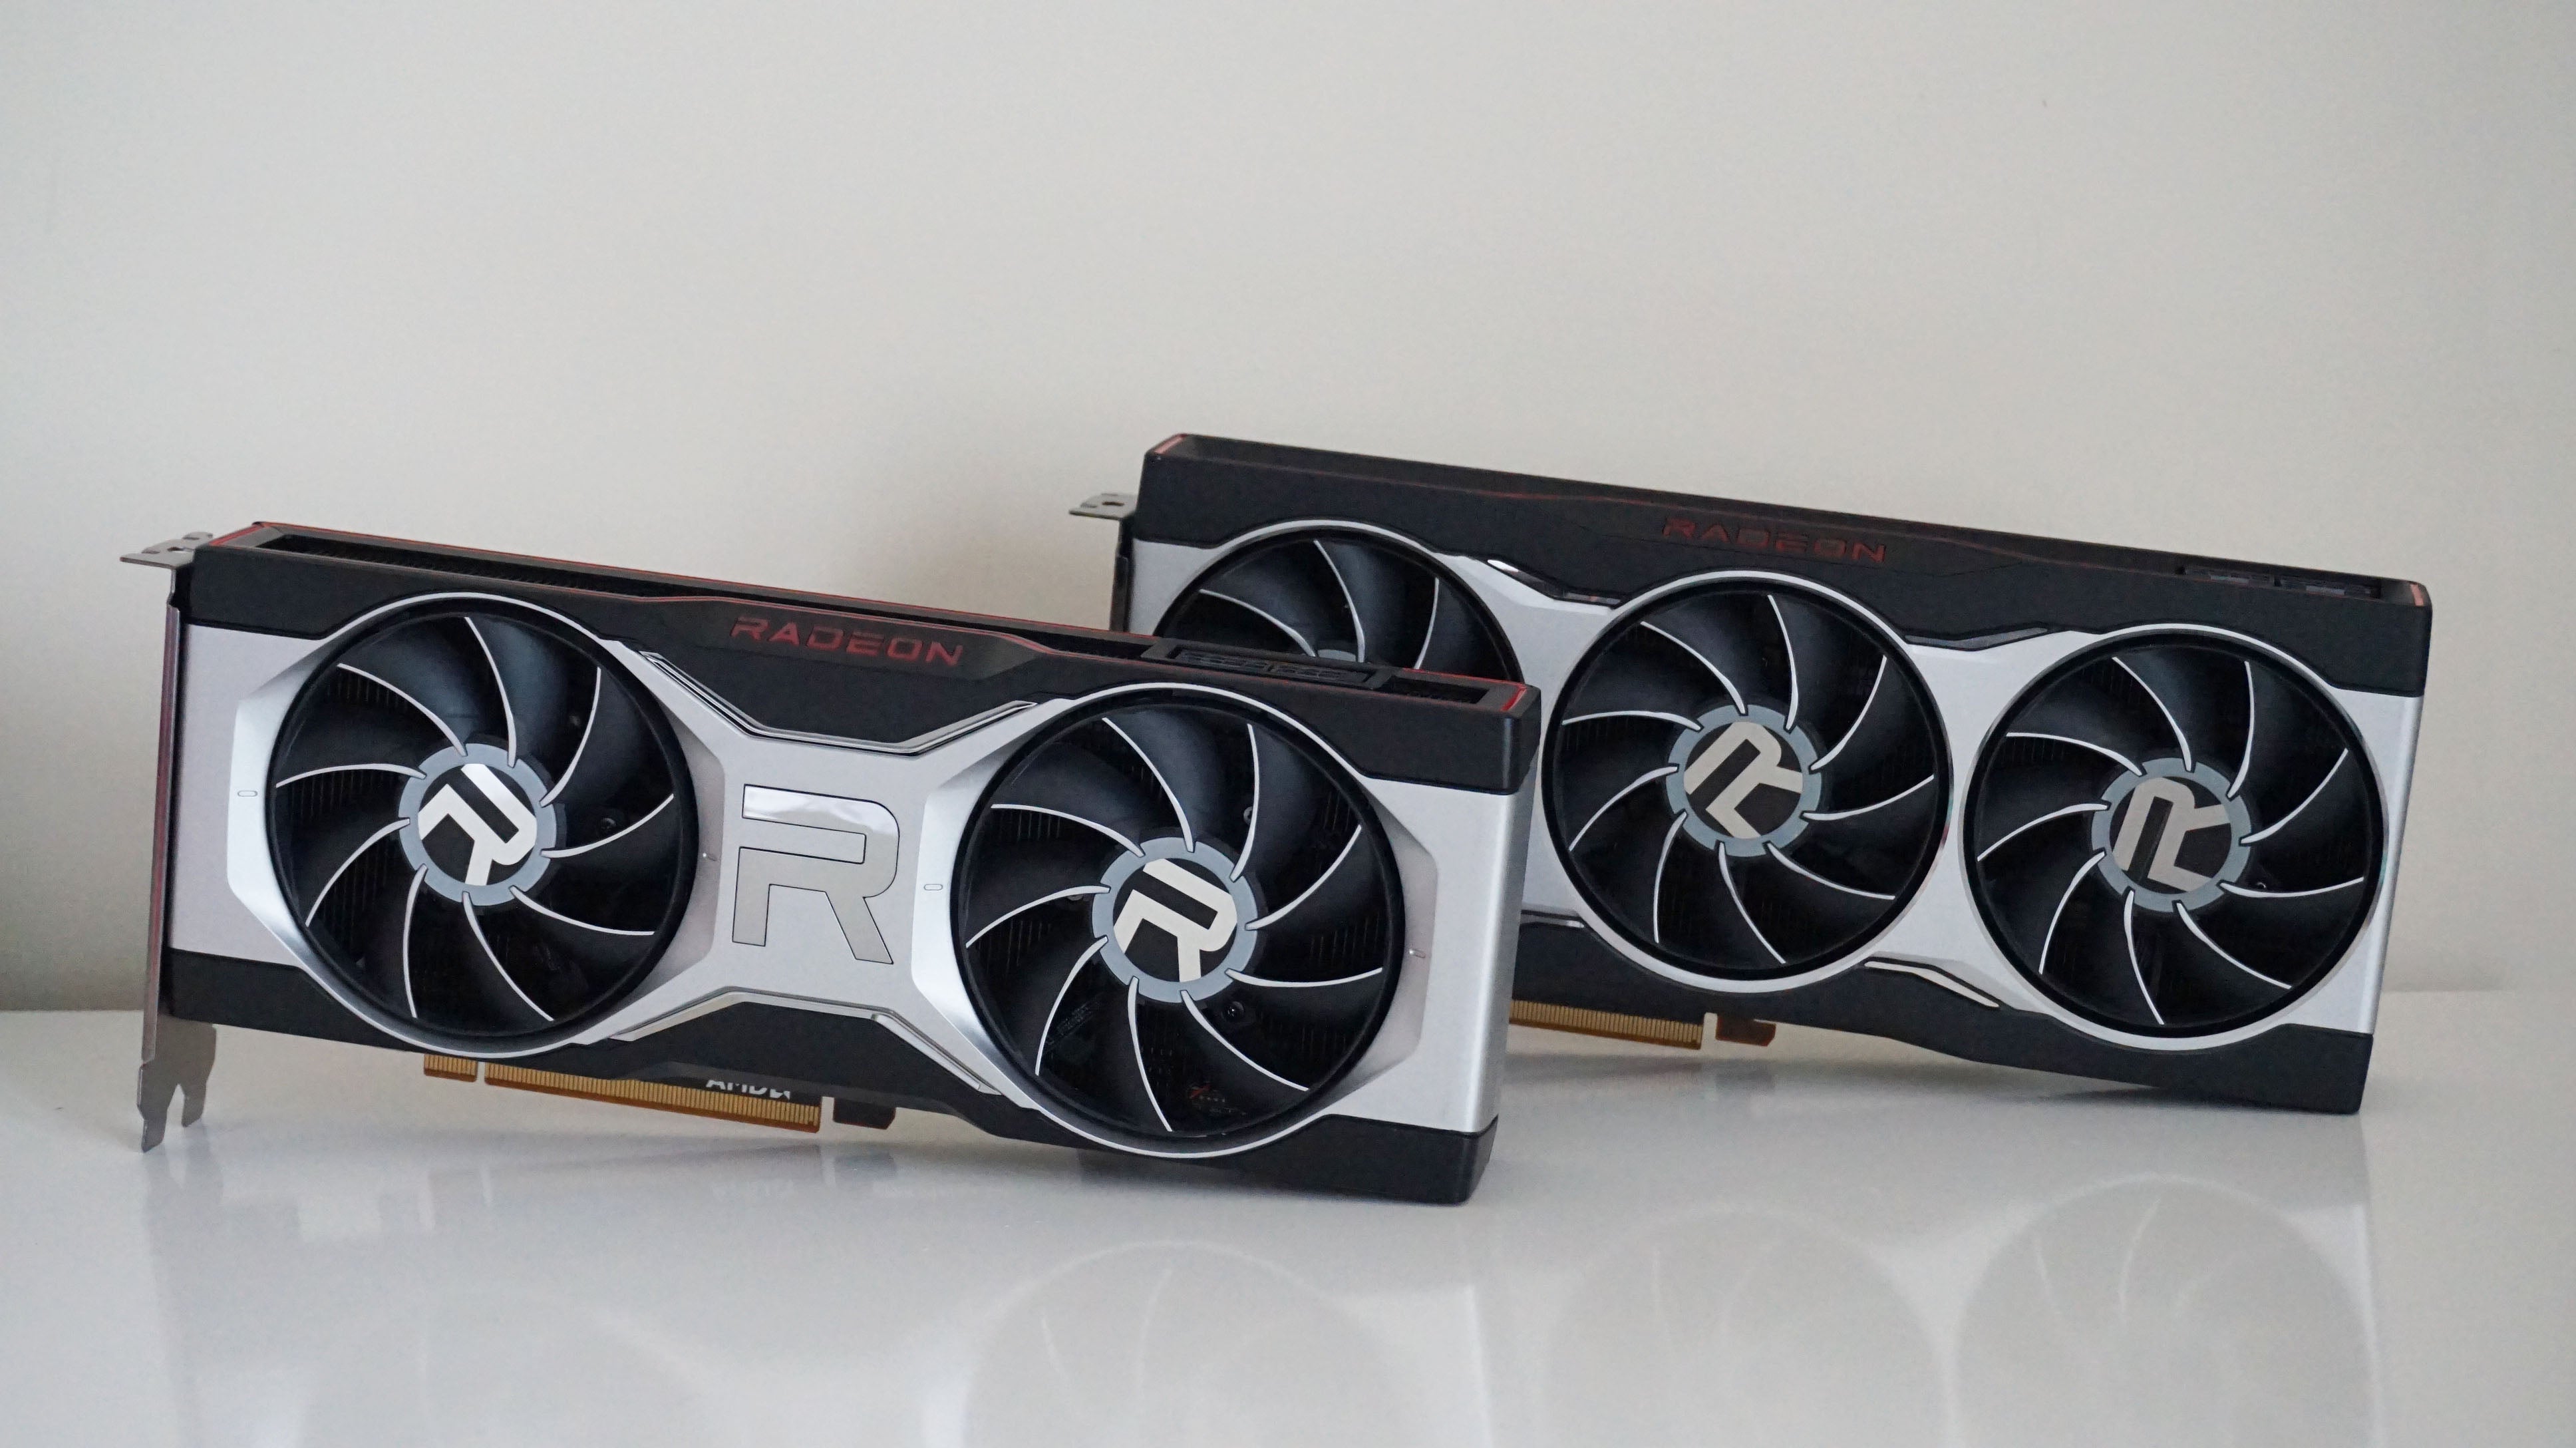 AMD's Radeon RX 6700 XT and RX 6800 graphics cards